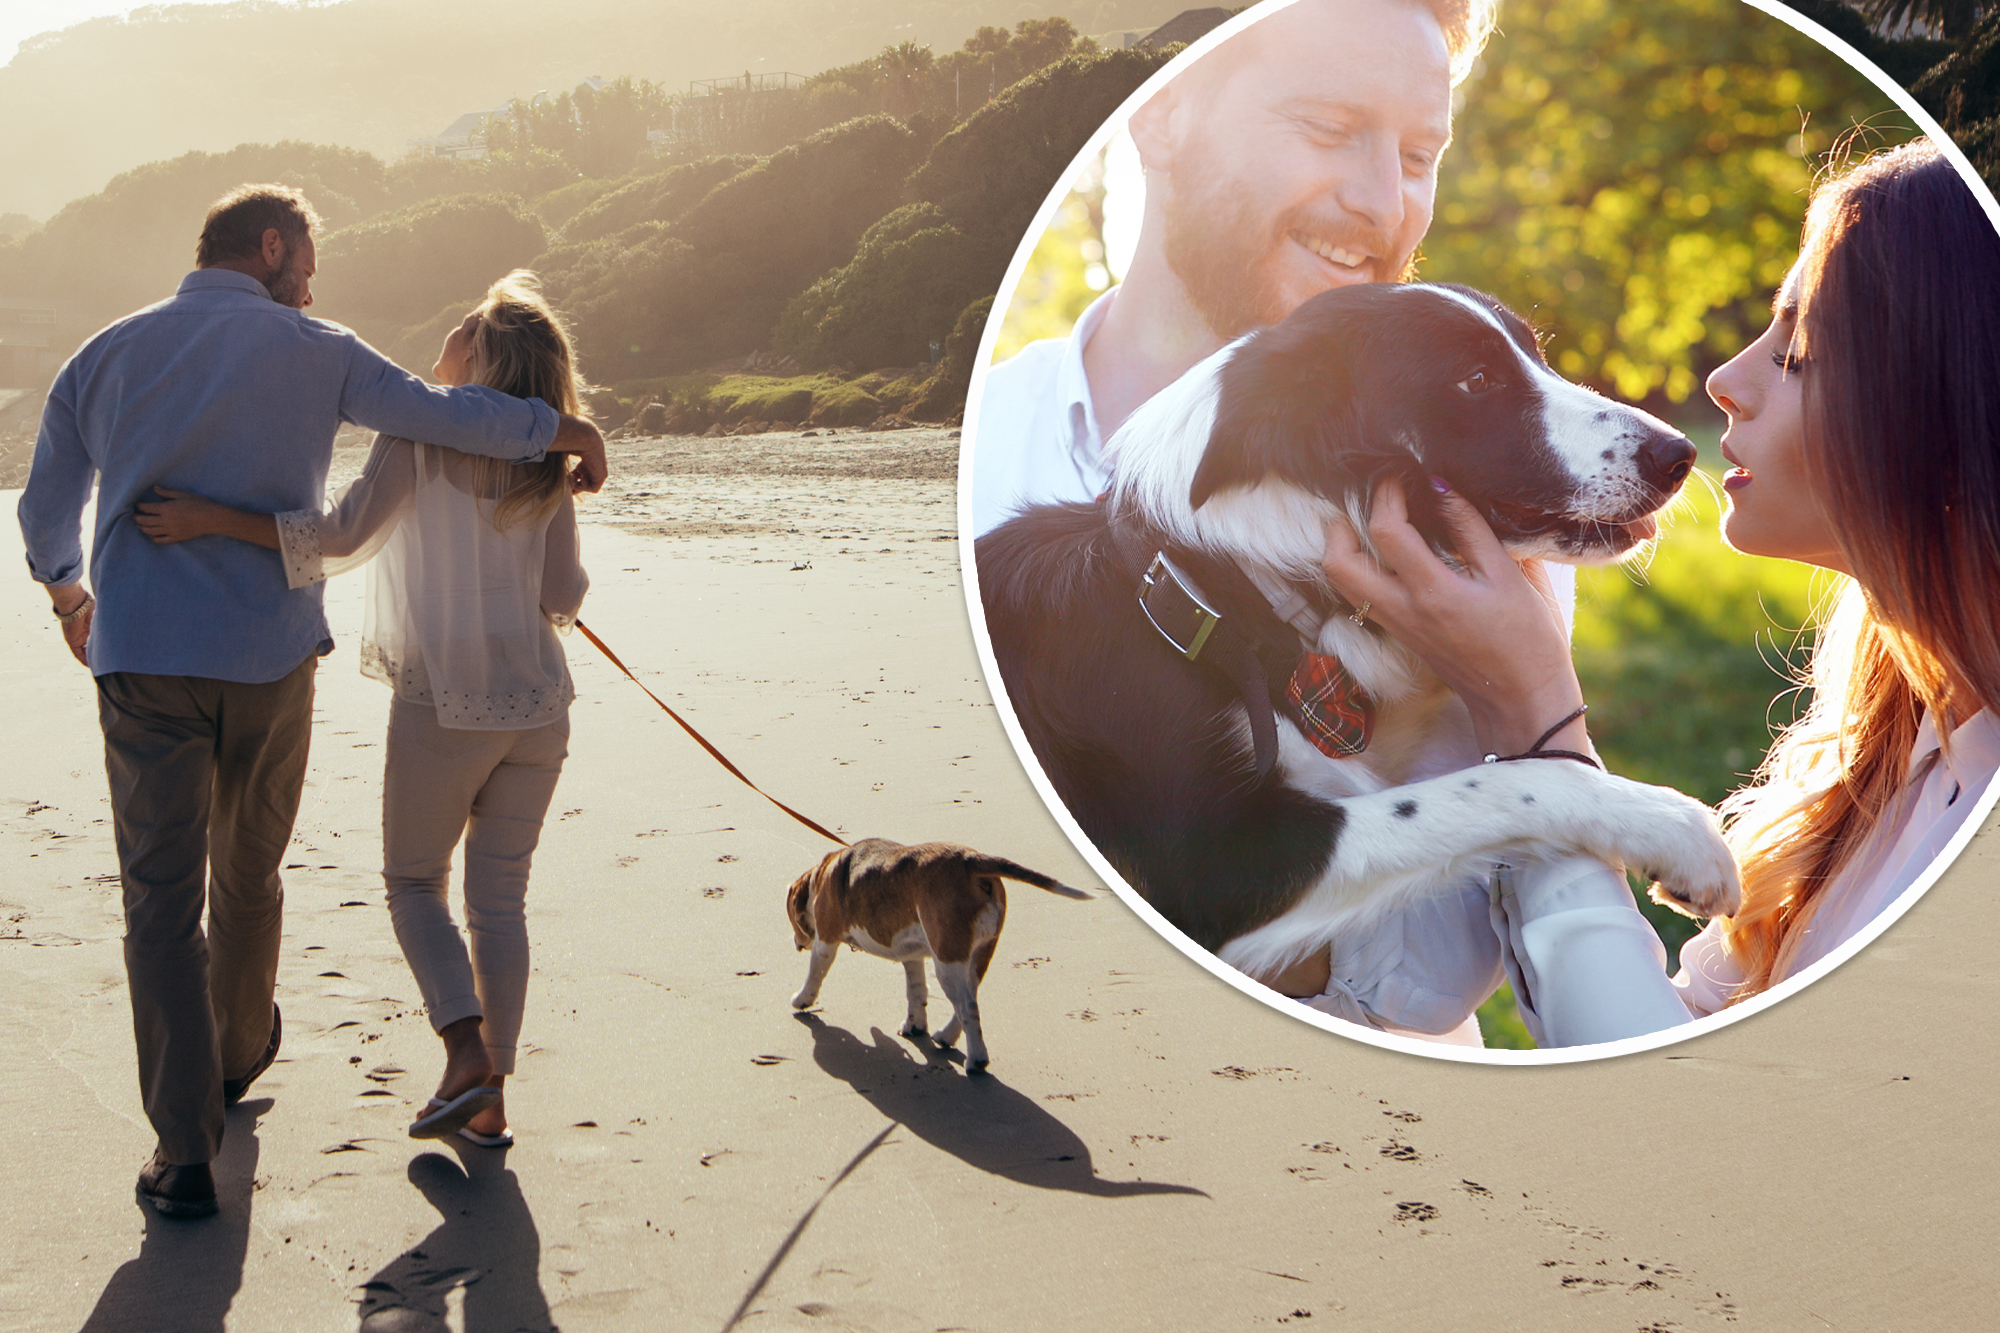 A man and woman walking their dog on a beach, discussing shared pet custody